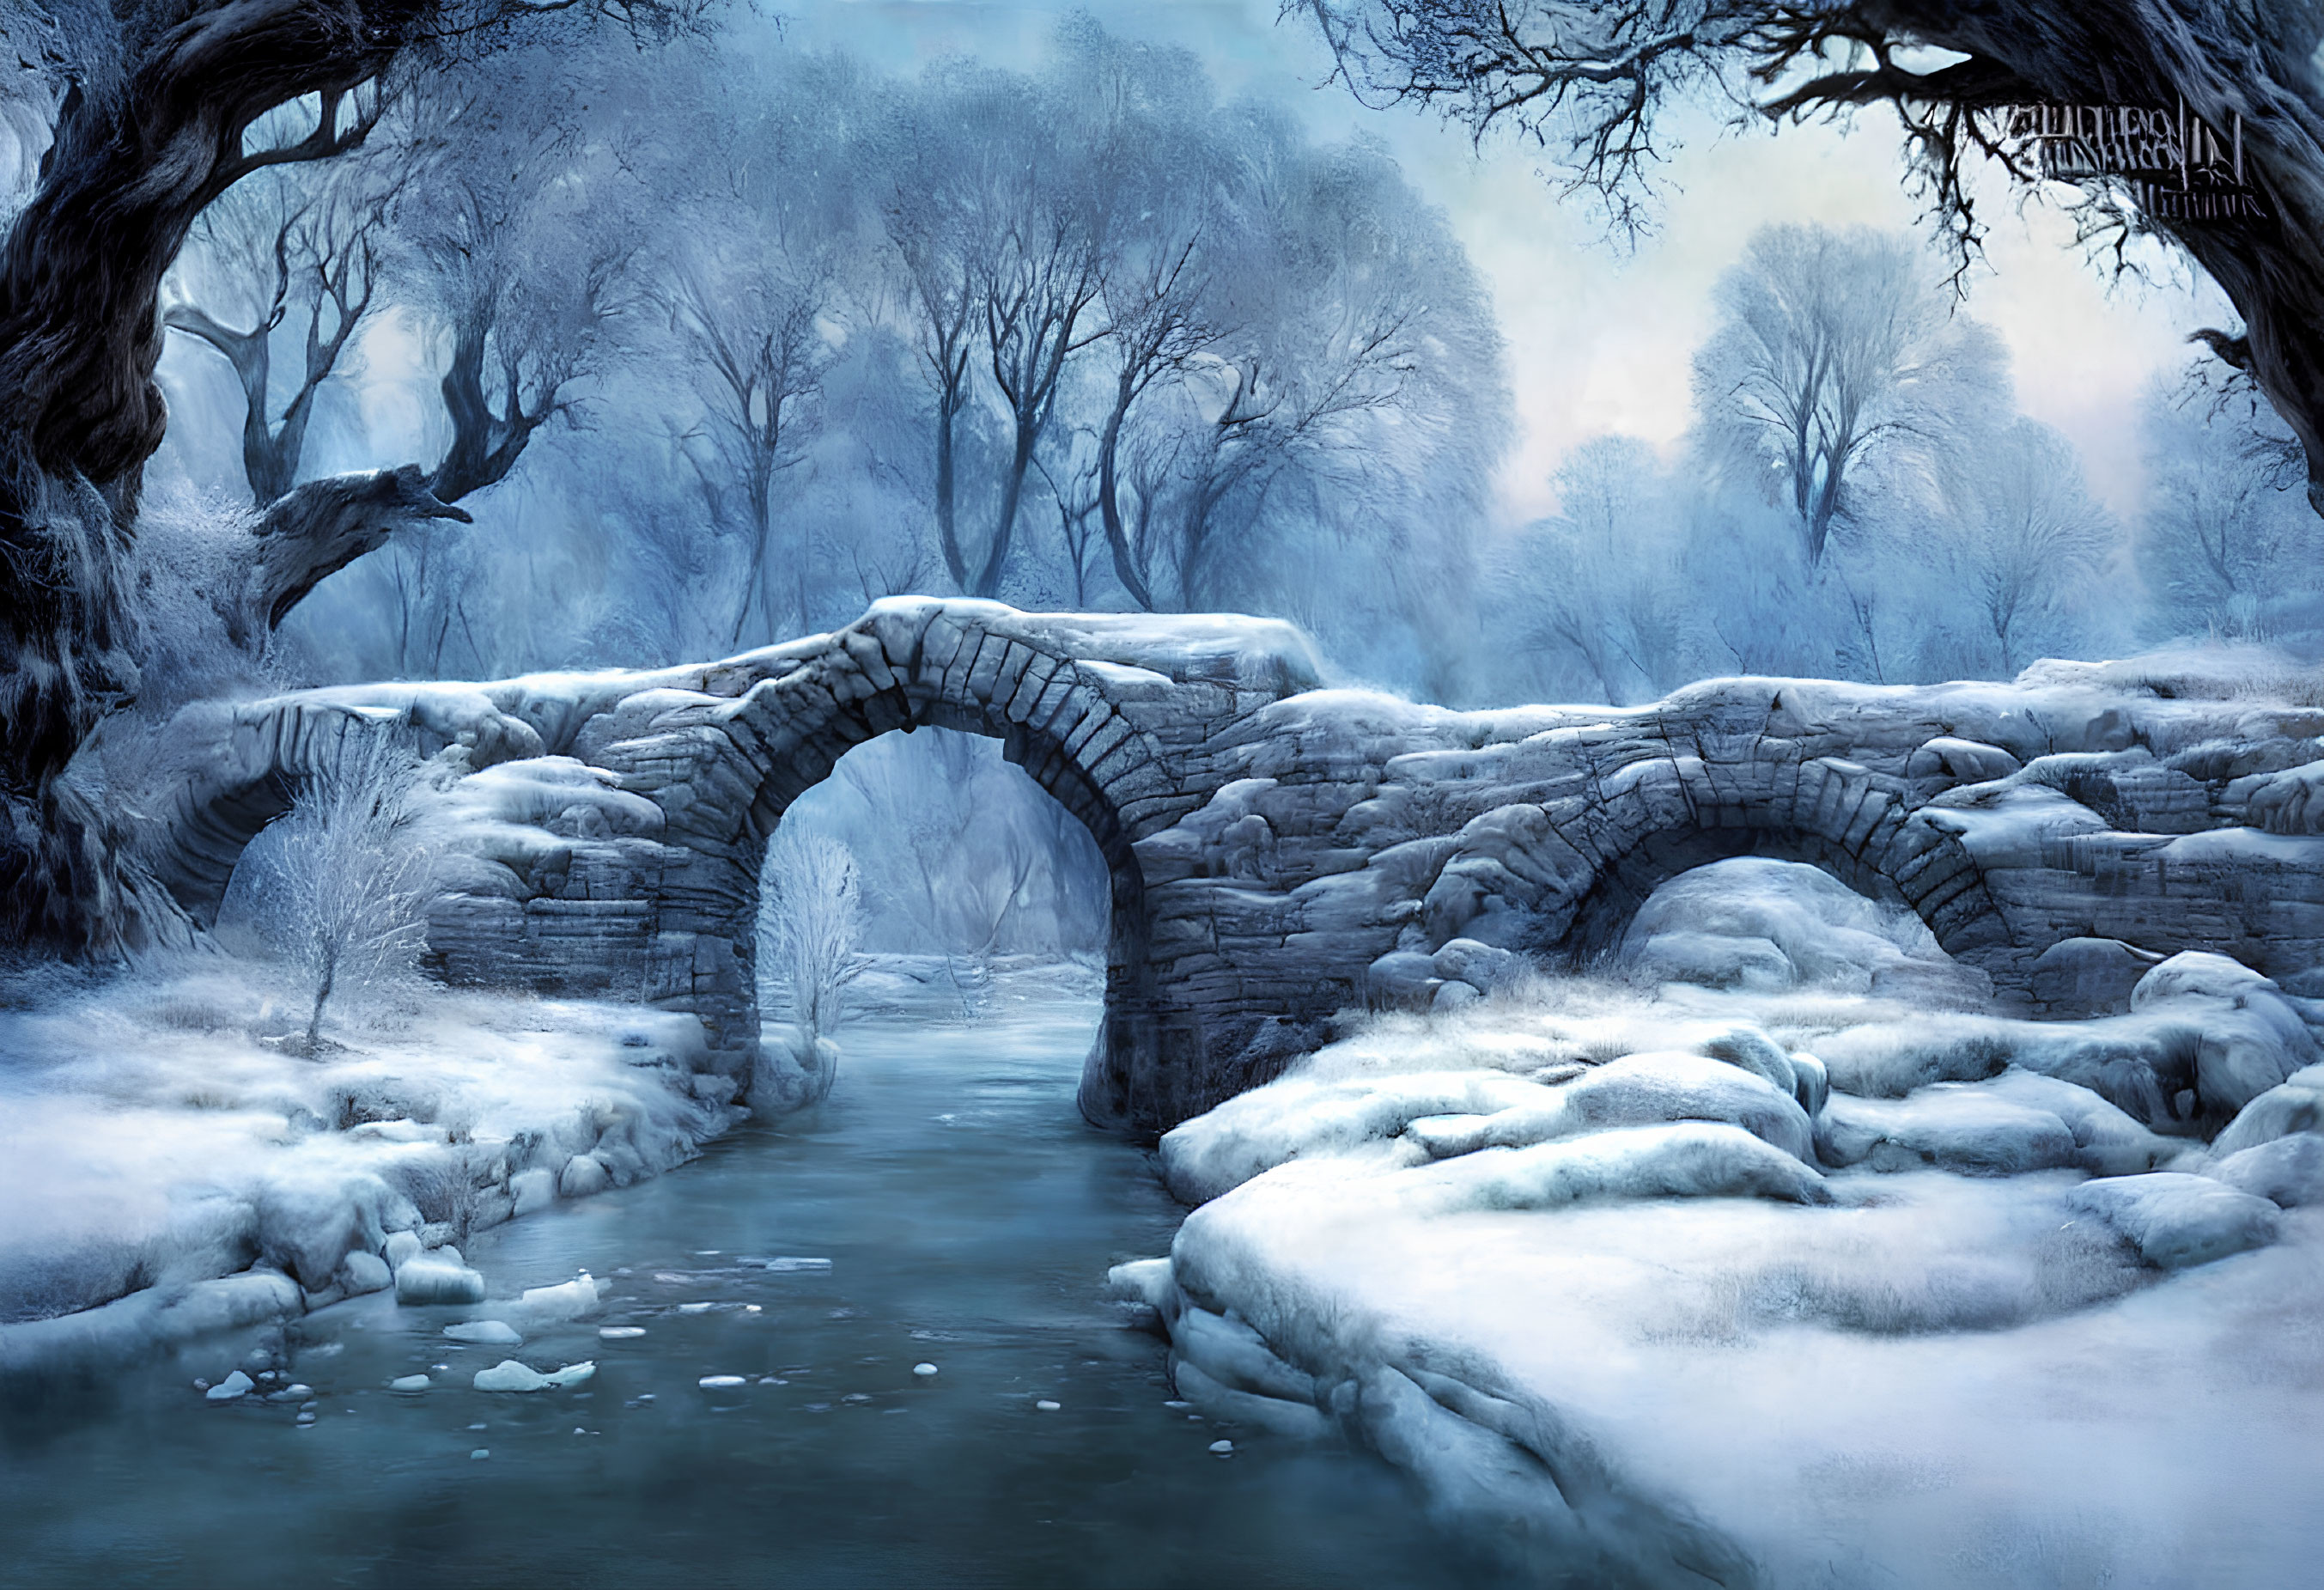 Snow-covered wintry landscape with old stone bridge and frosted trees.